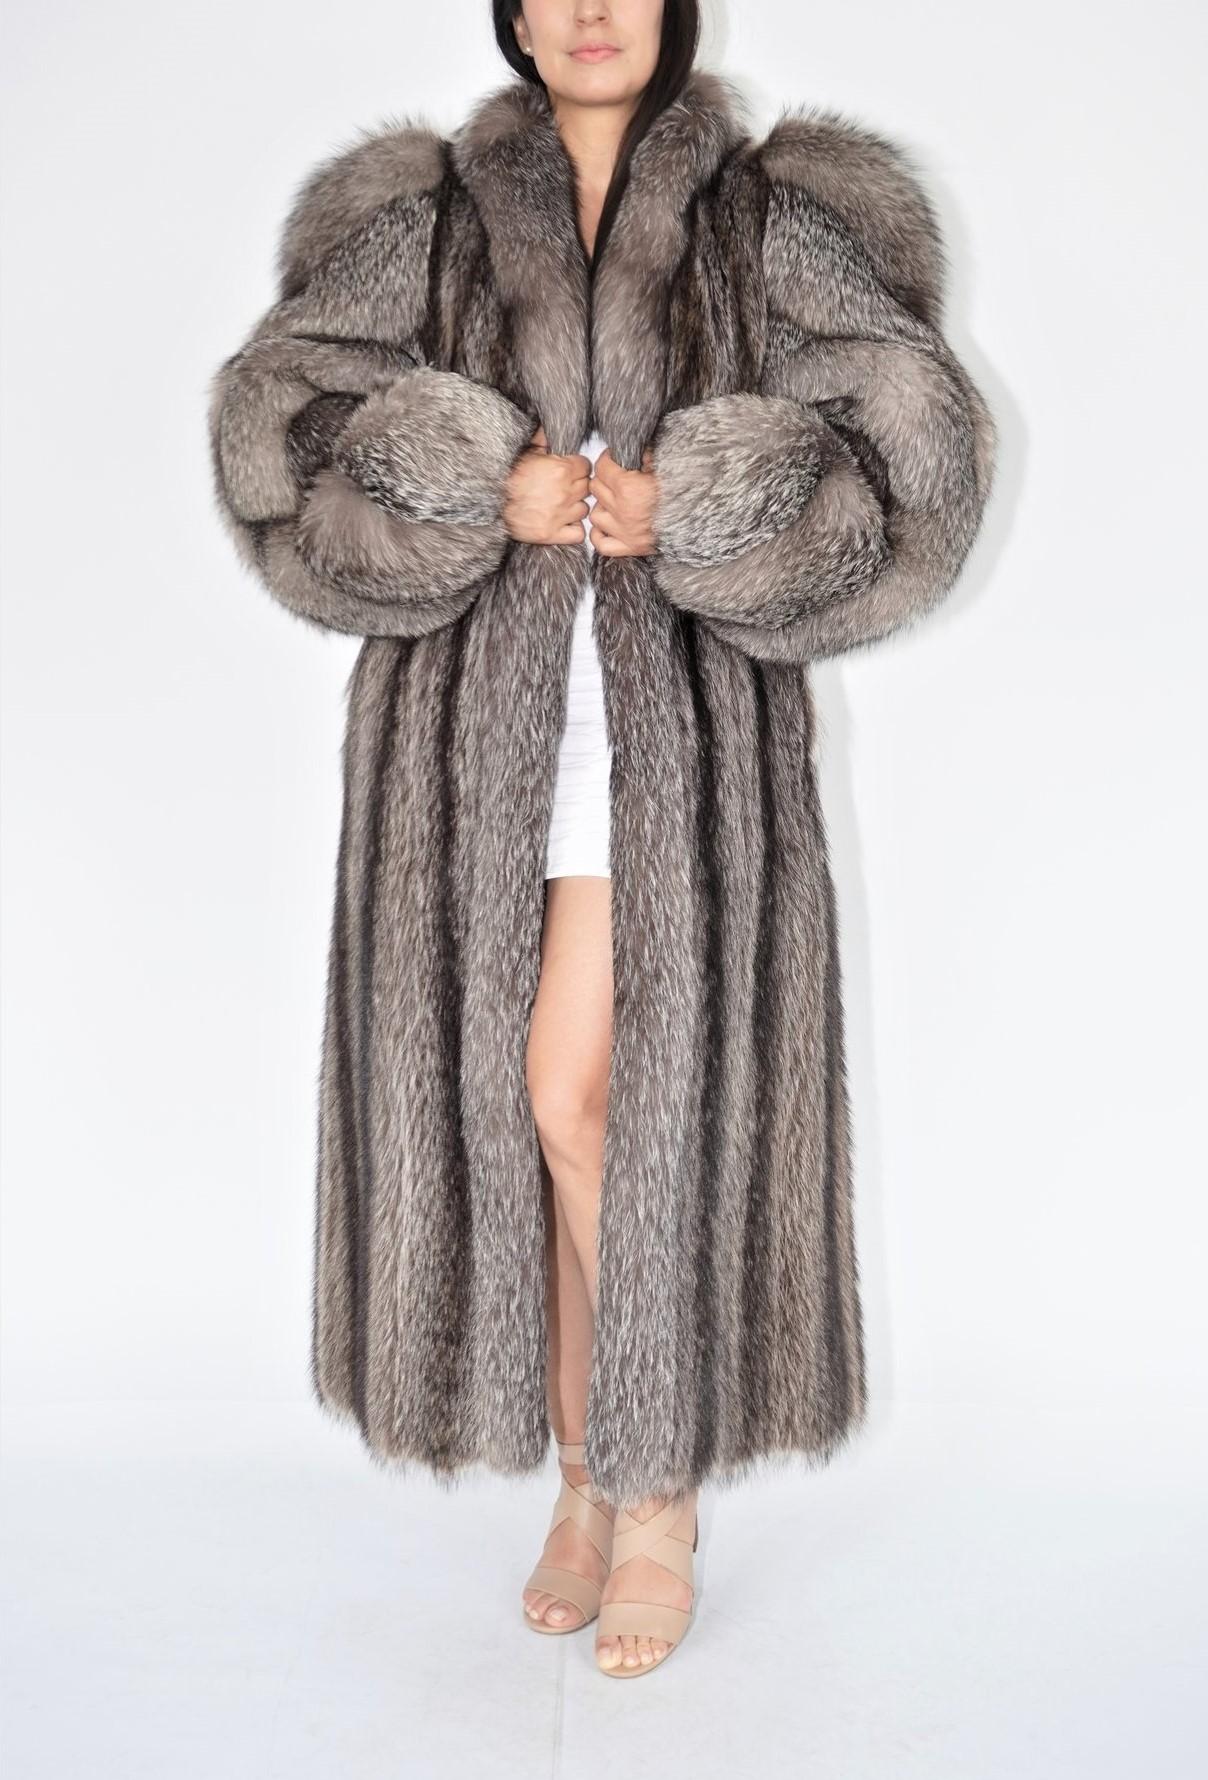 Raccoon fur coat with silver fox trim and sleeves size 8-10 For Sale 1